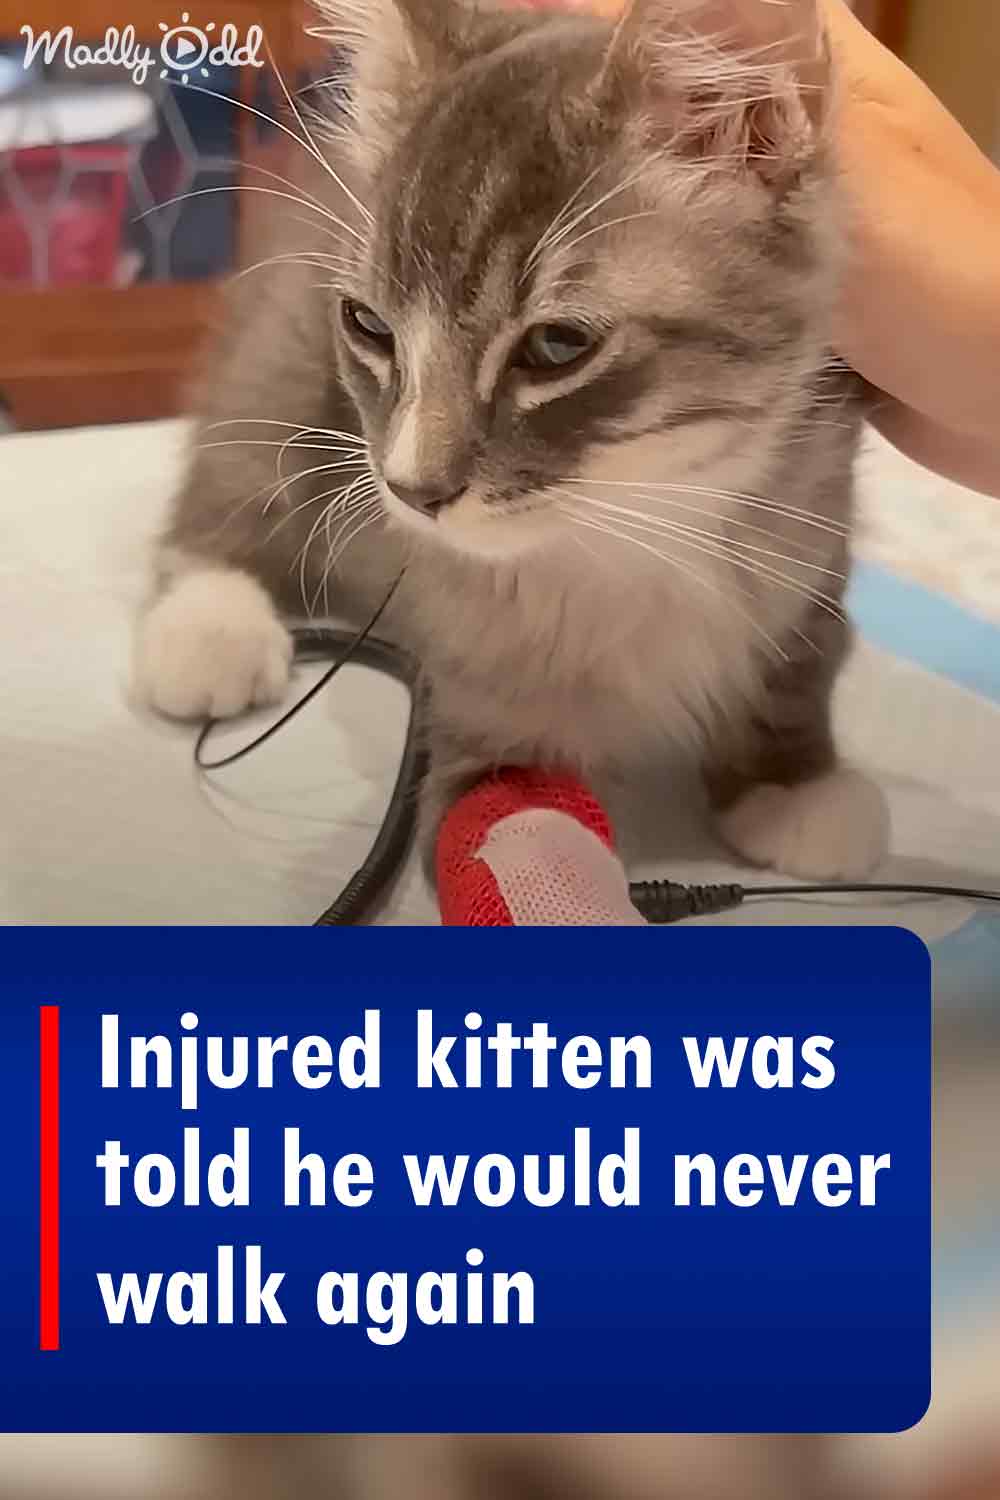 Injured kitten was told he would never walk again